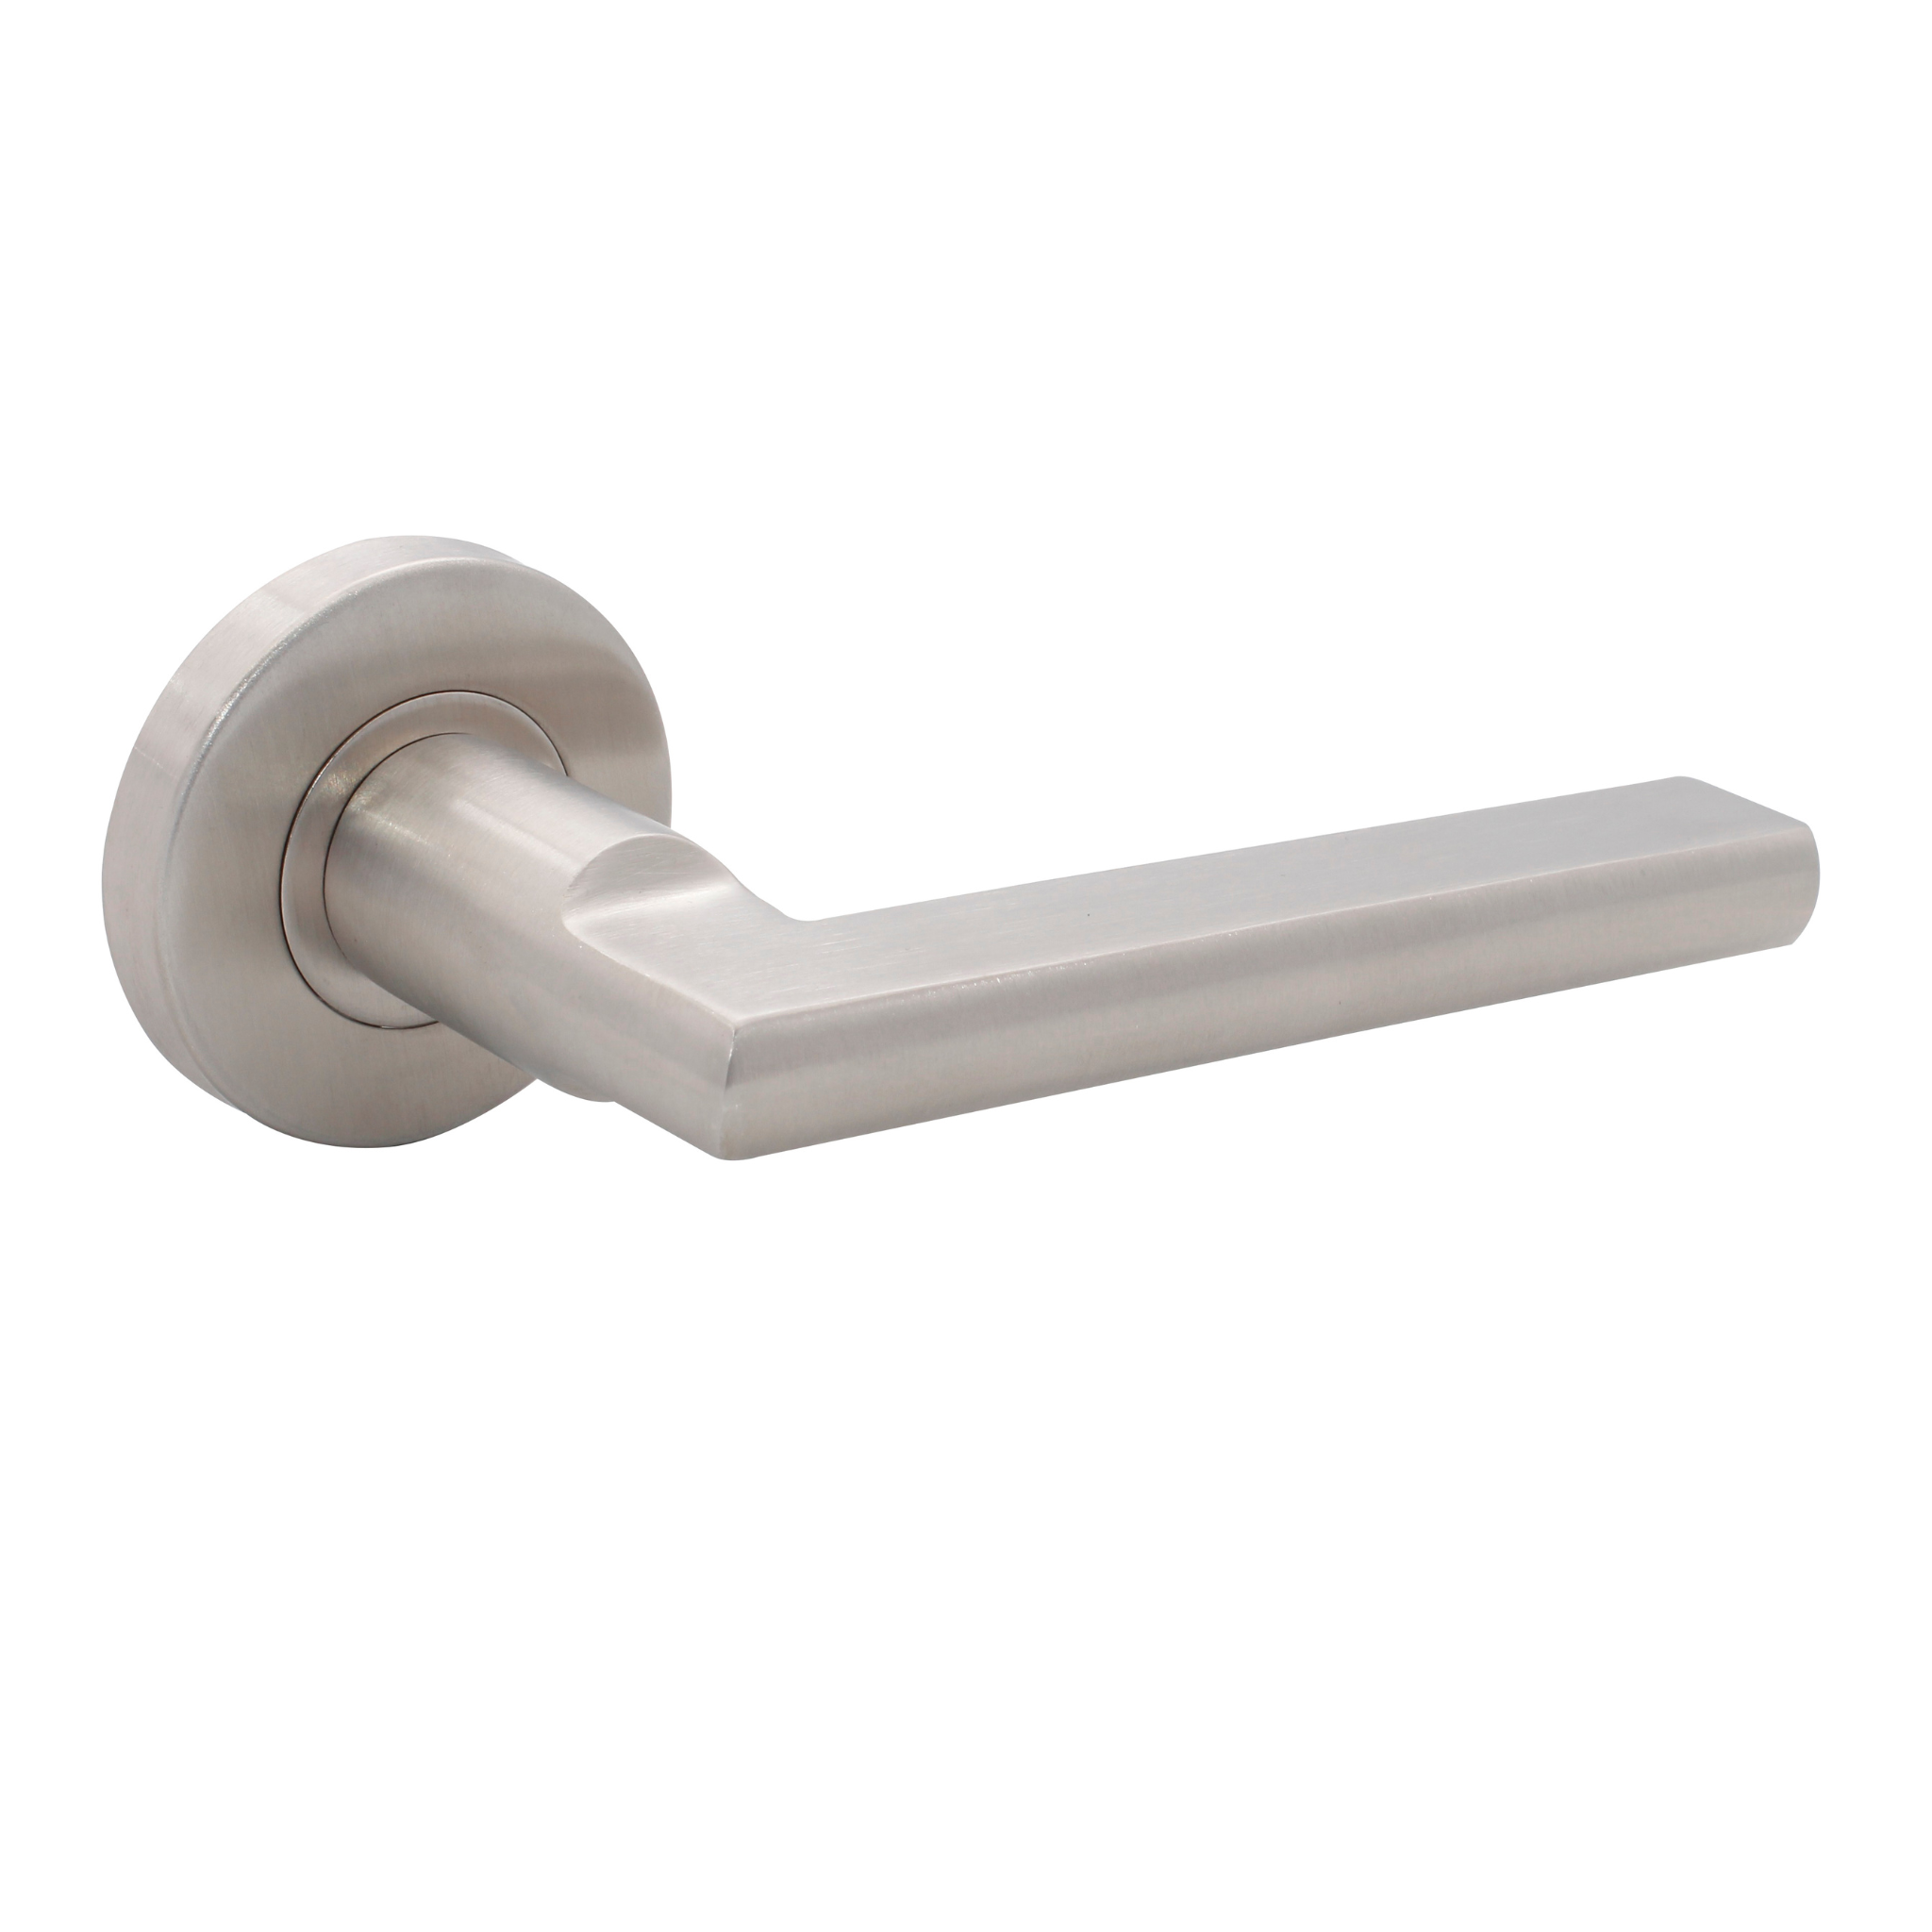 FS103.R._.SS, Lever Handles, Solid, On Round Rose, With Escutcheons, 134mm (l), Stainless Steel, CISA